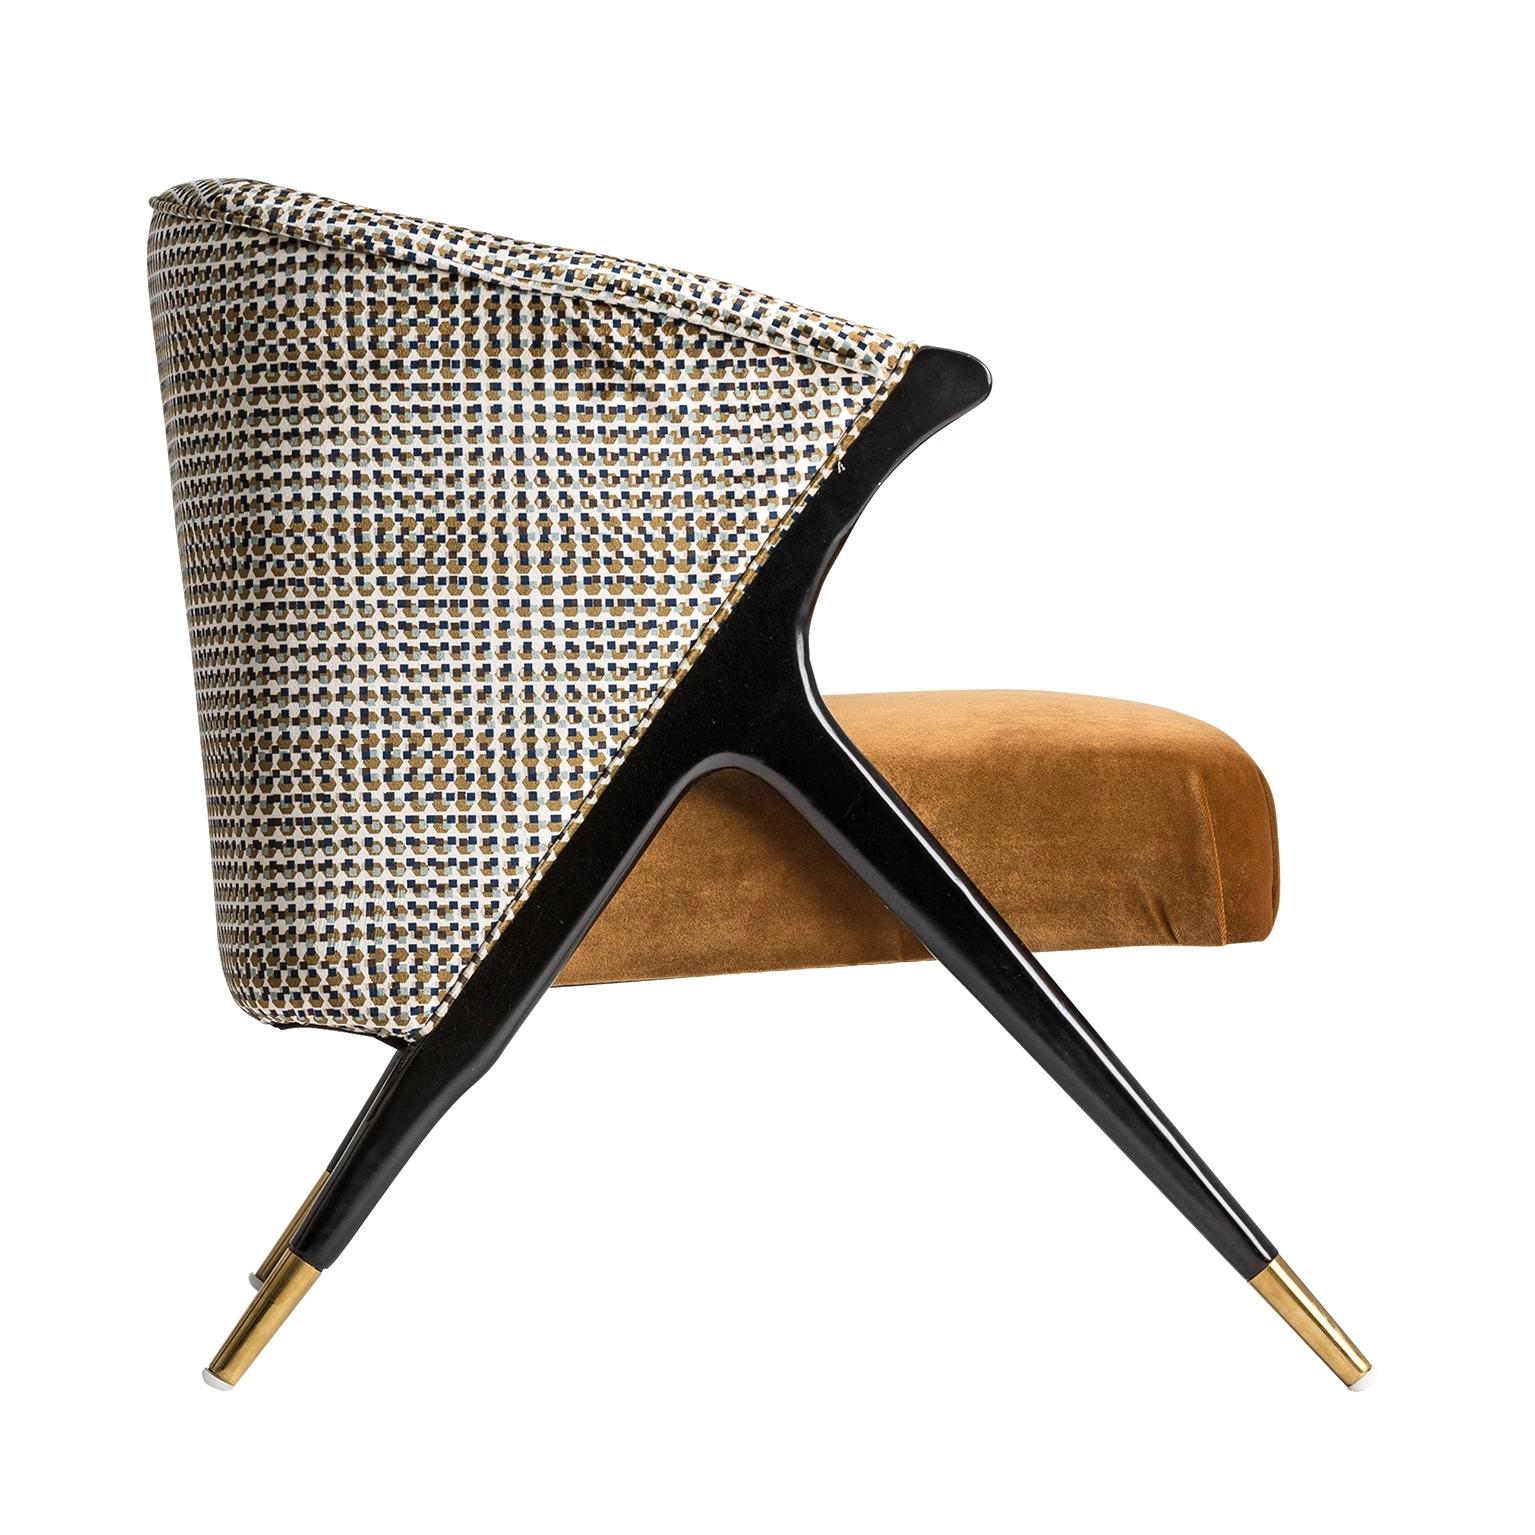 Black lacquer wooden feet with brass finish and psychedelic velvet lounge armchair Mid-Century Modern style.